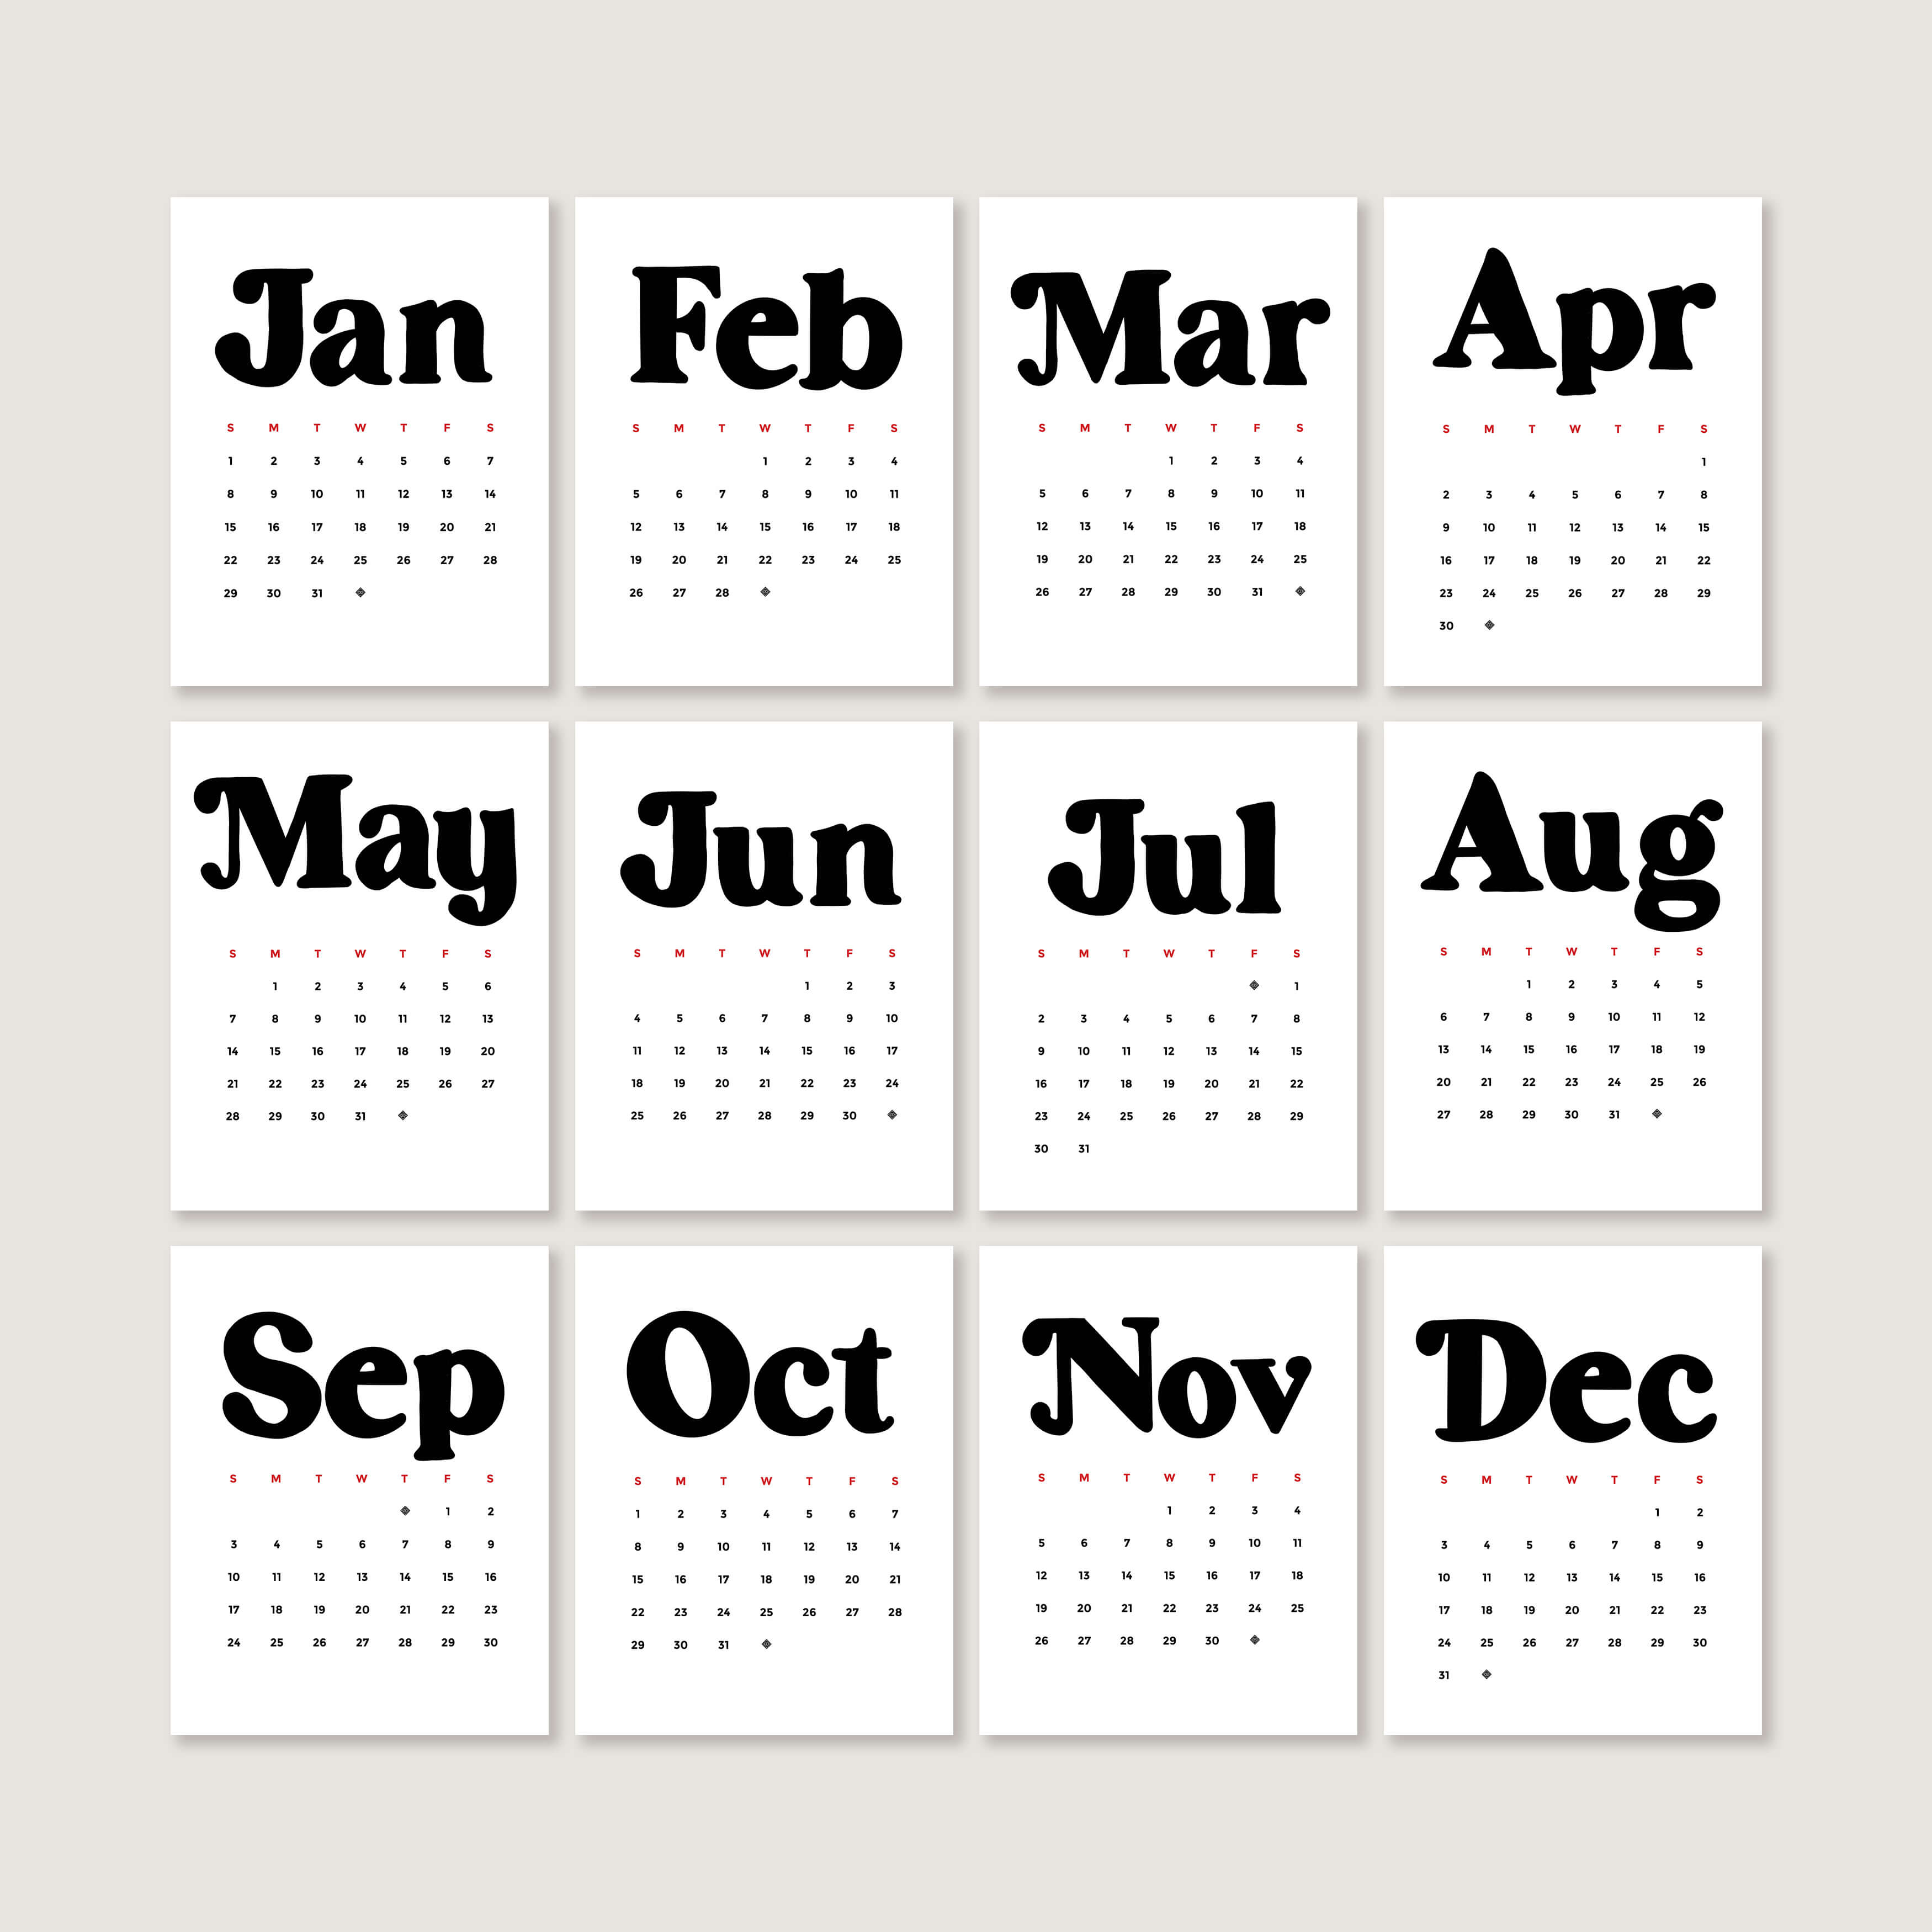 Free Printable 2023 Calendar • Little Gold Pixel • Free PDF download of the 2023 calendar for you to print out and enjoy!